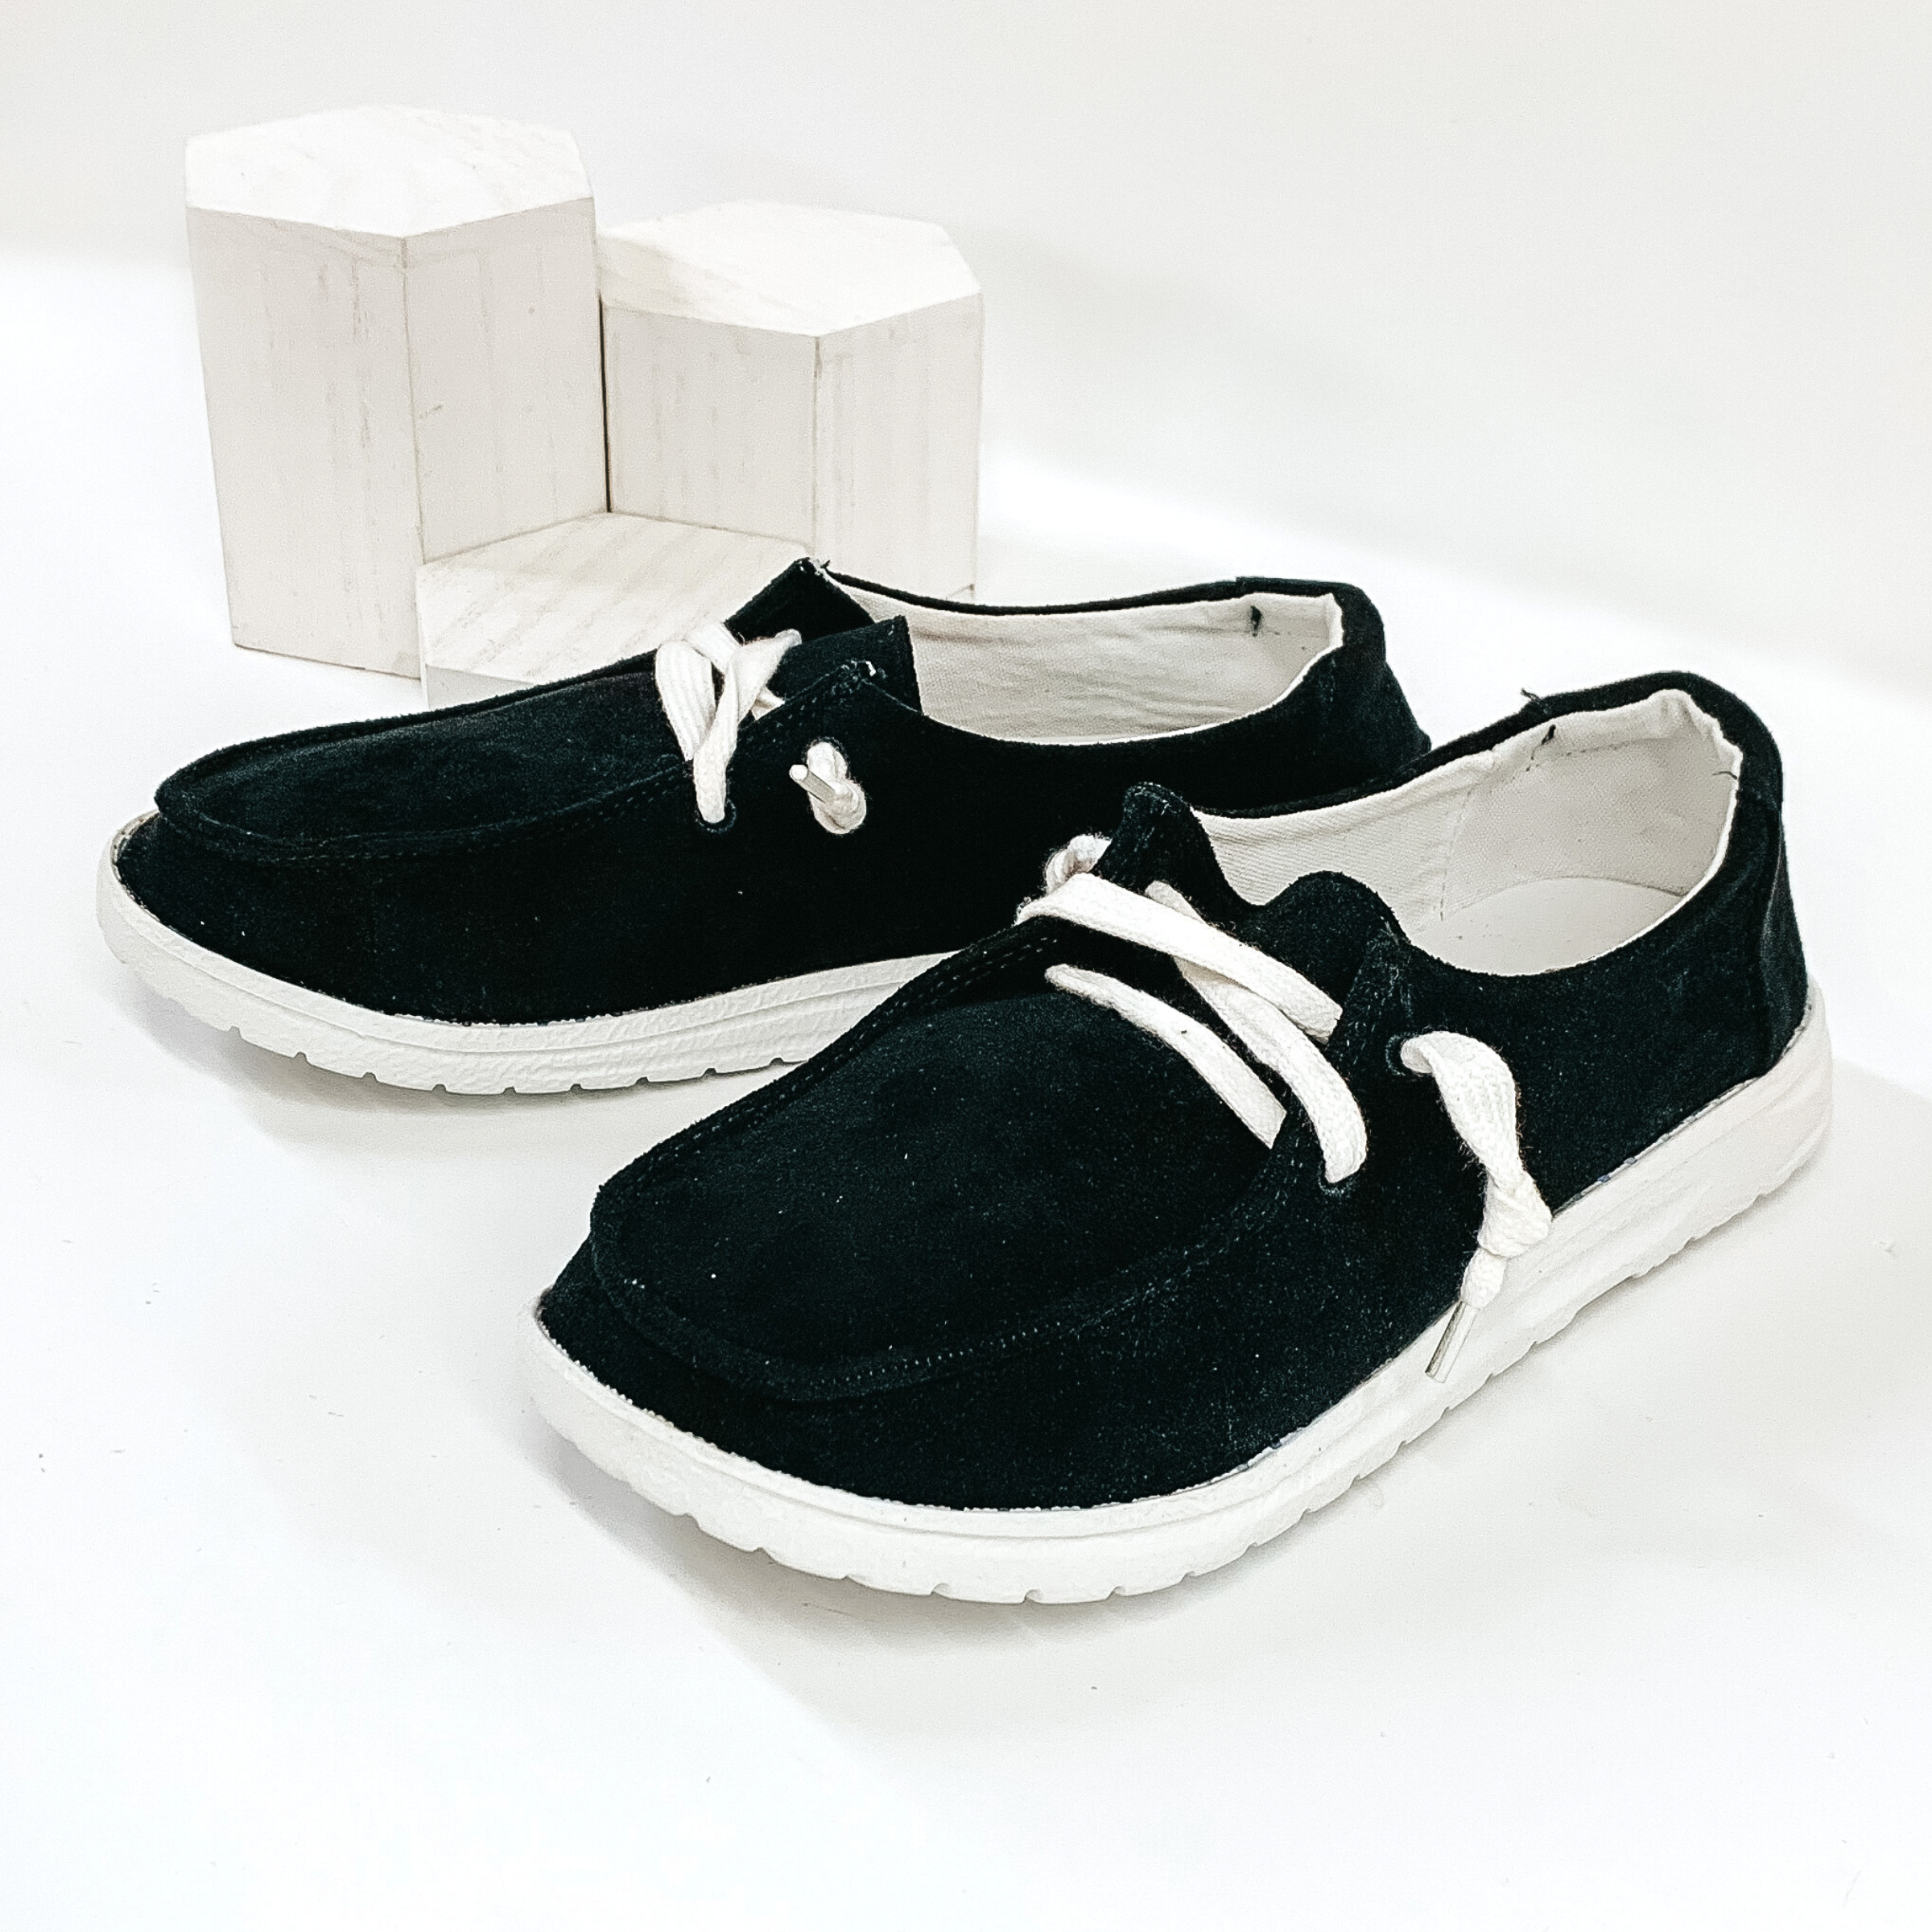 Black slip on suede loafers with a white colored shoe lace and white sole. Pictured on white background.